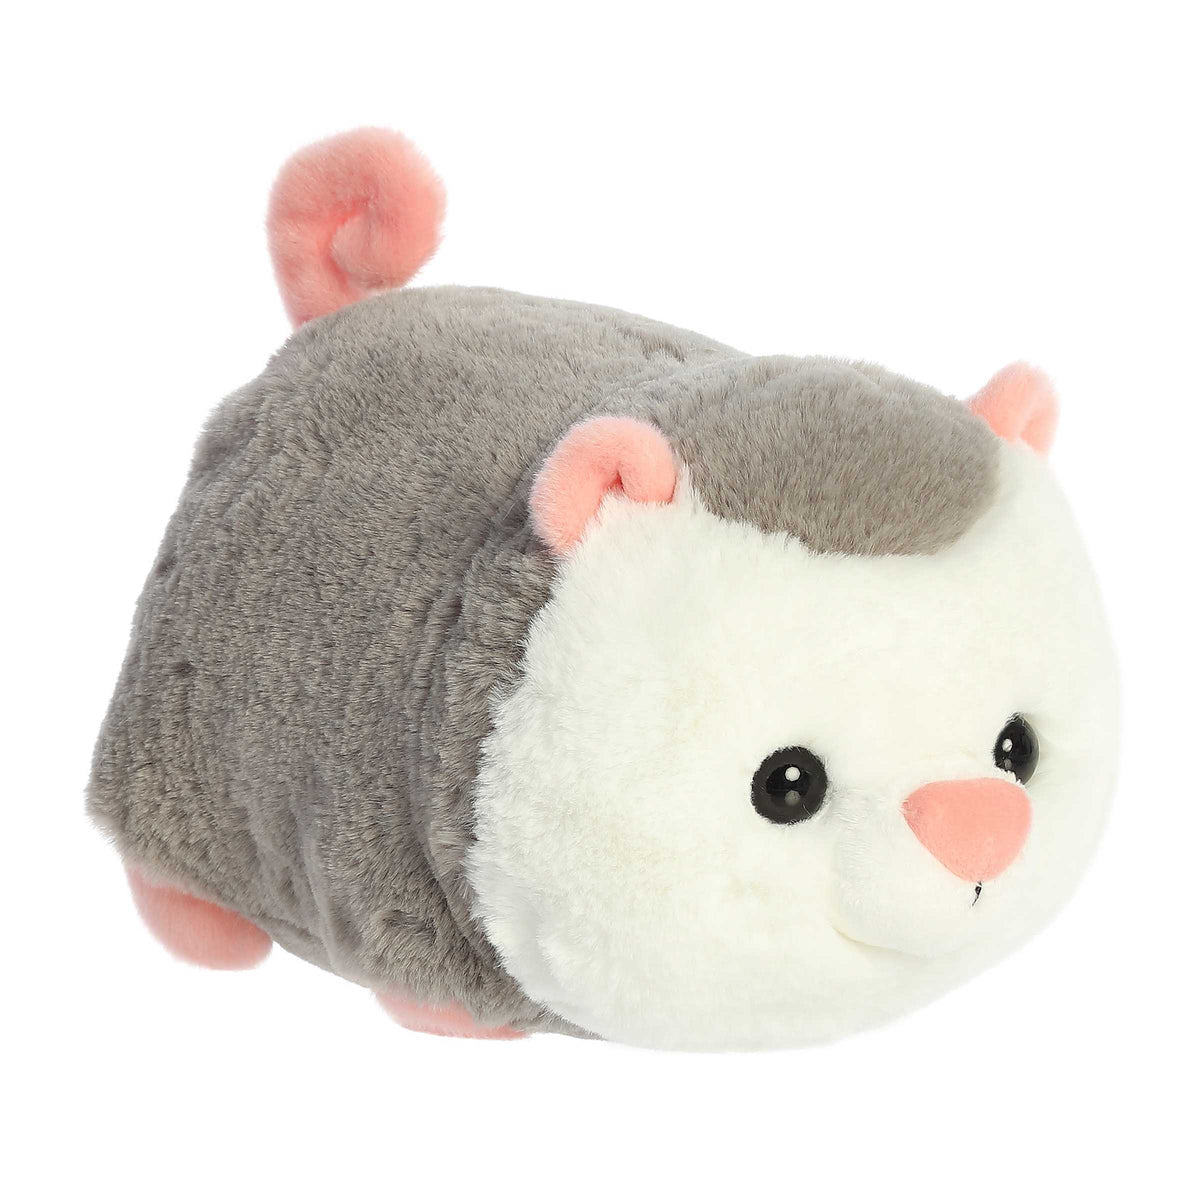 Odin Opossum from Spudsters, a cuddly potato-shaped plush with soft grey fur and sweet features